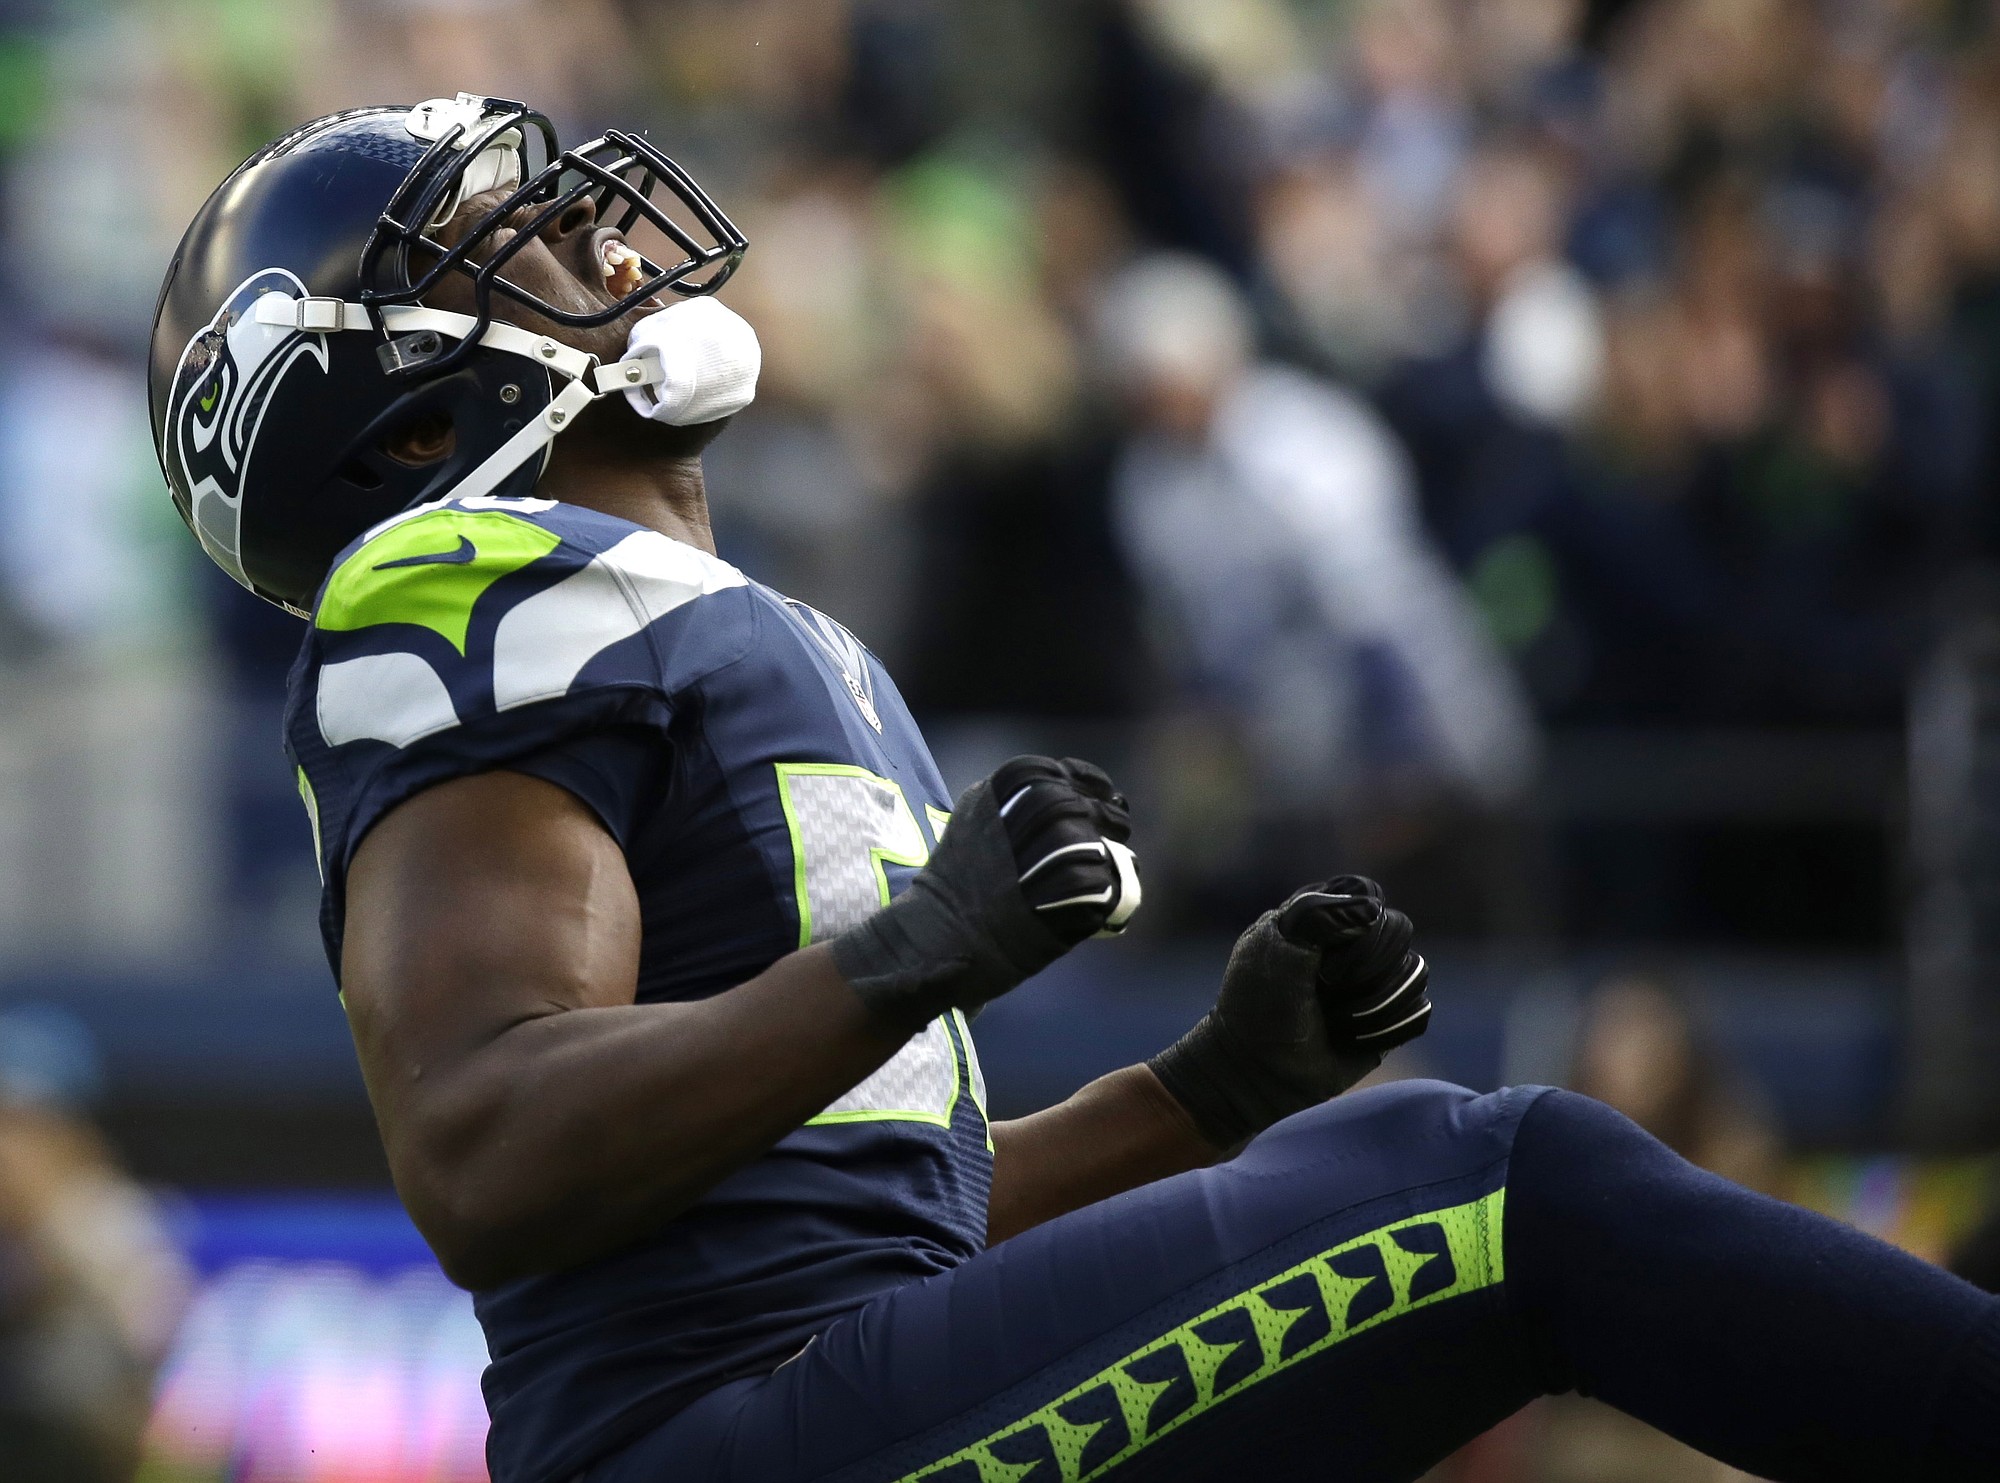 Seattle Seahawks defensive end Cliff Avril reacts after he sacked Arizona Cardinals quarterback Drew Stanton in the first half of an NFL football game, Sunday, Nov. 23, 2014, in Seattle.